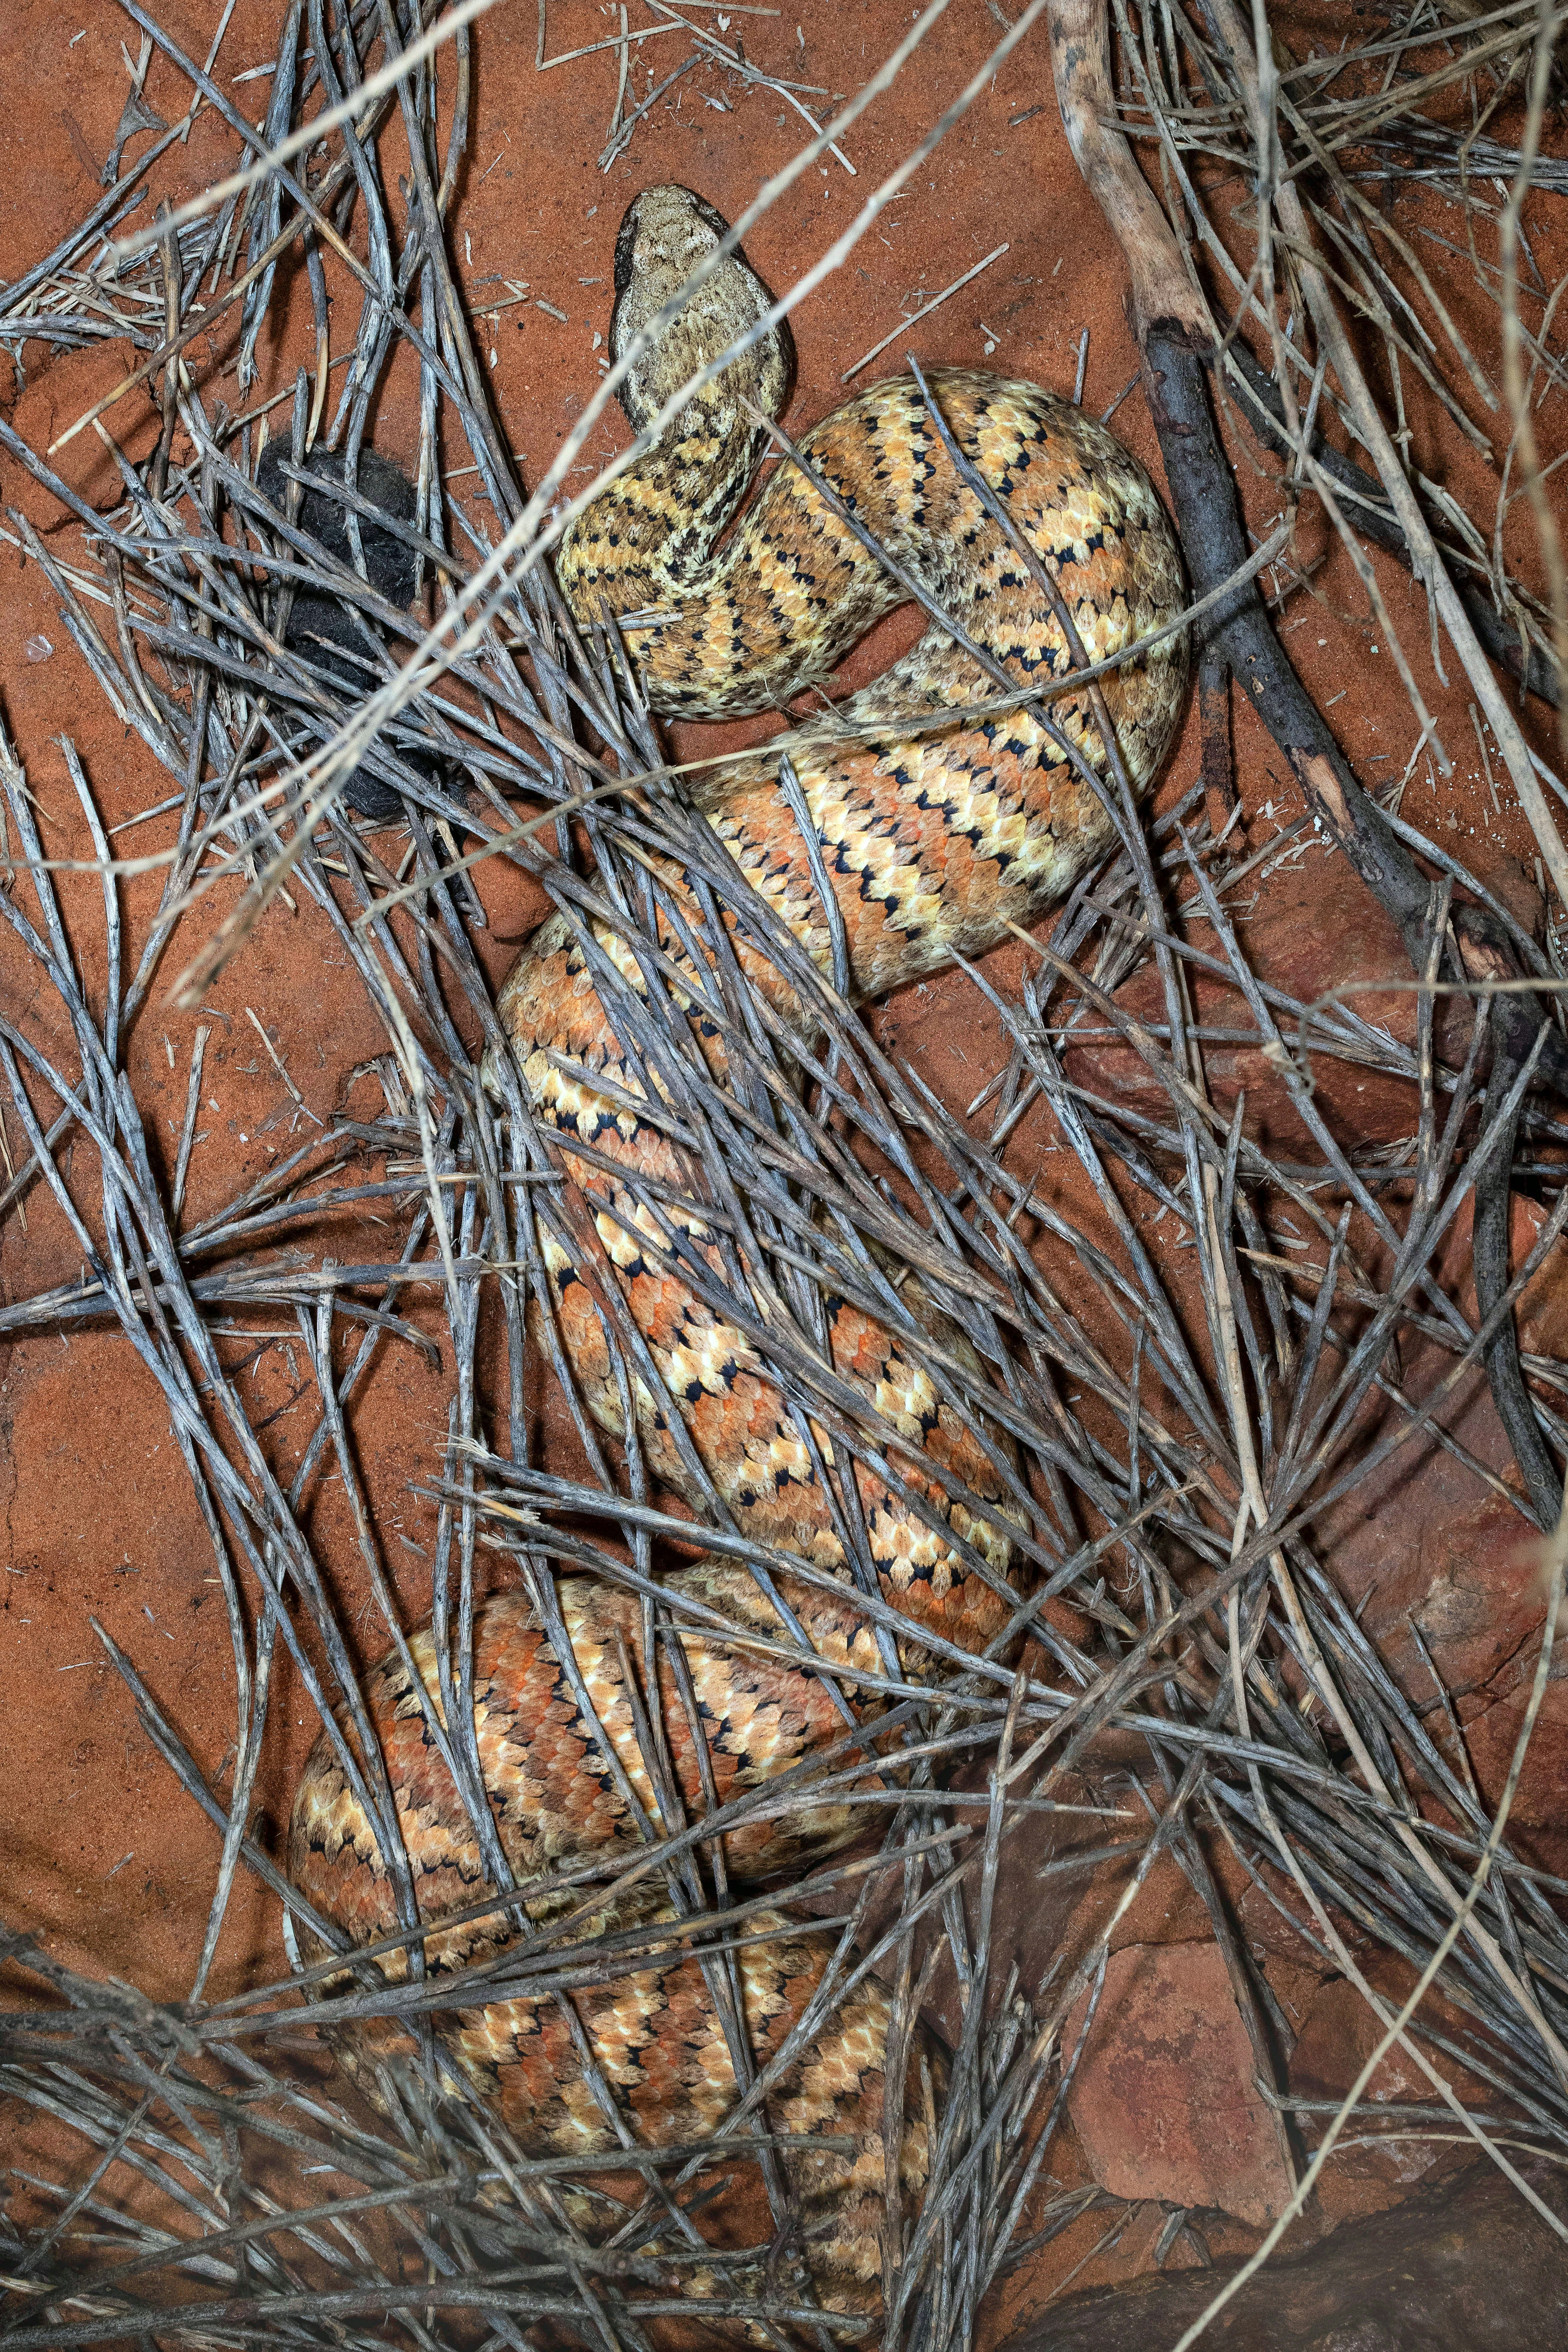 The Central Australian colour form of the Death Adder. Photographed at Hartleys Crocodile Adventures.